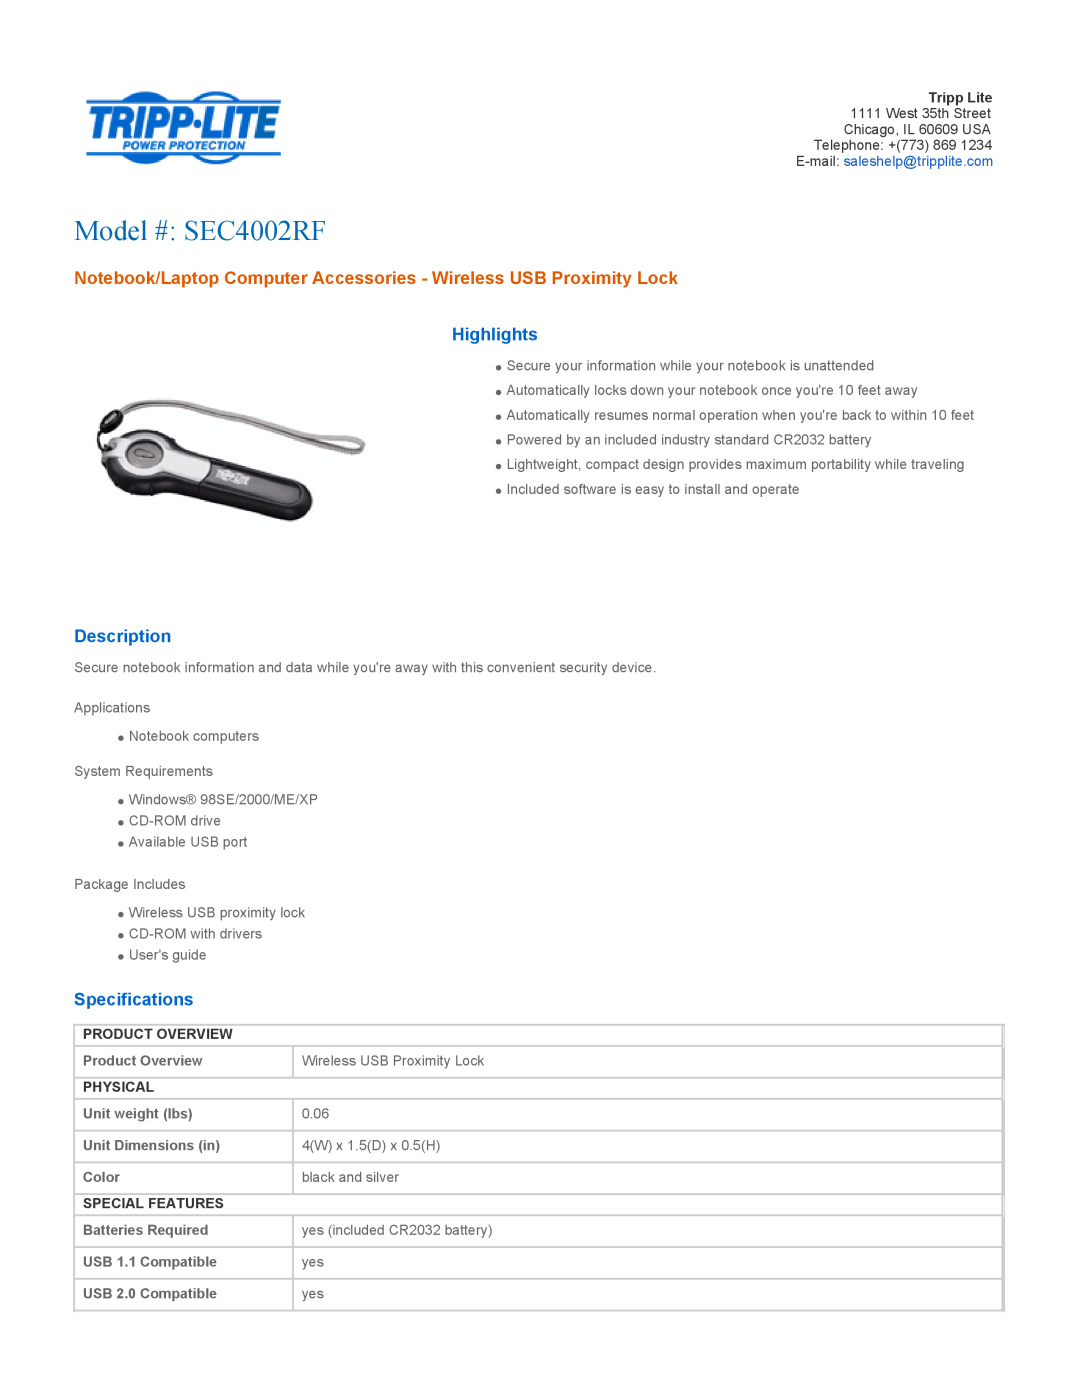 Tripp Lite specifications Product Overview, Physical, Special Features, Model # SEC4002RF, Highlights, Description 